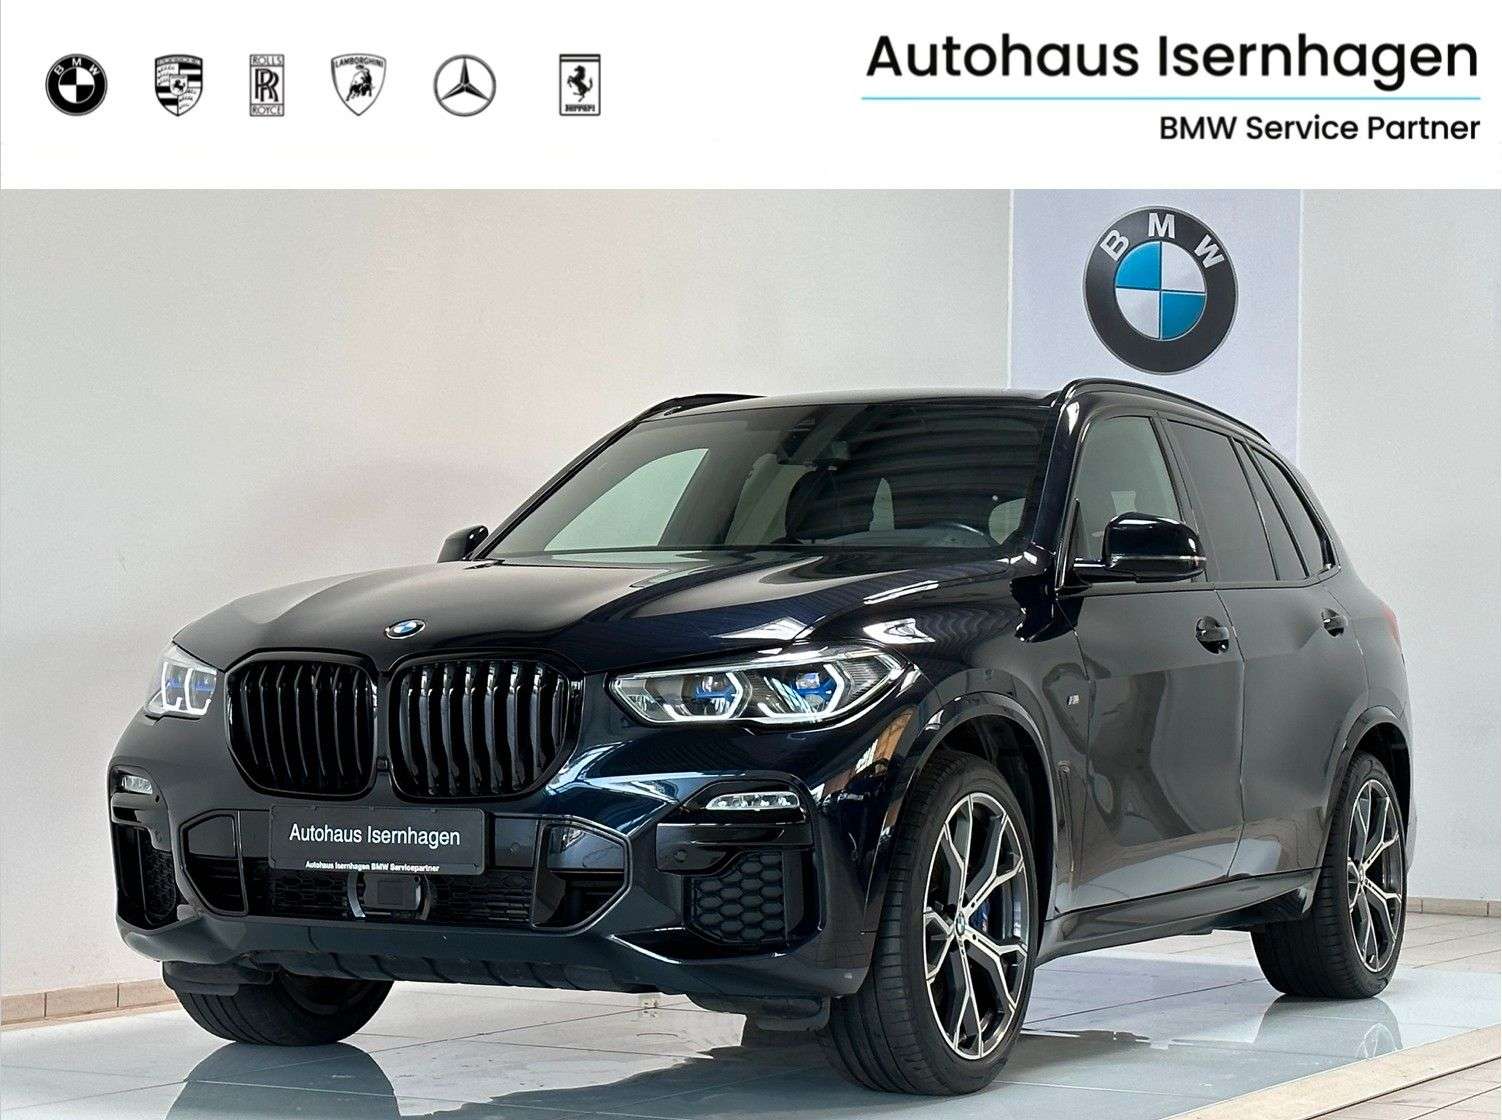 BMW X5 Off-Road/Pick-up in Black used in Isernhagen for € 62,999.-